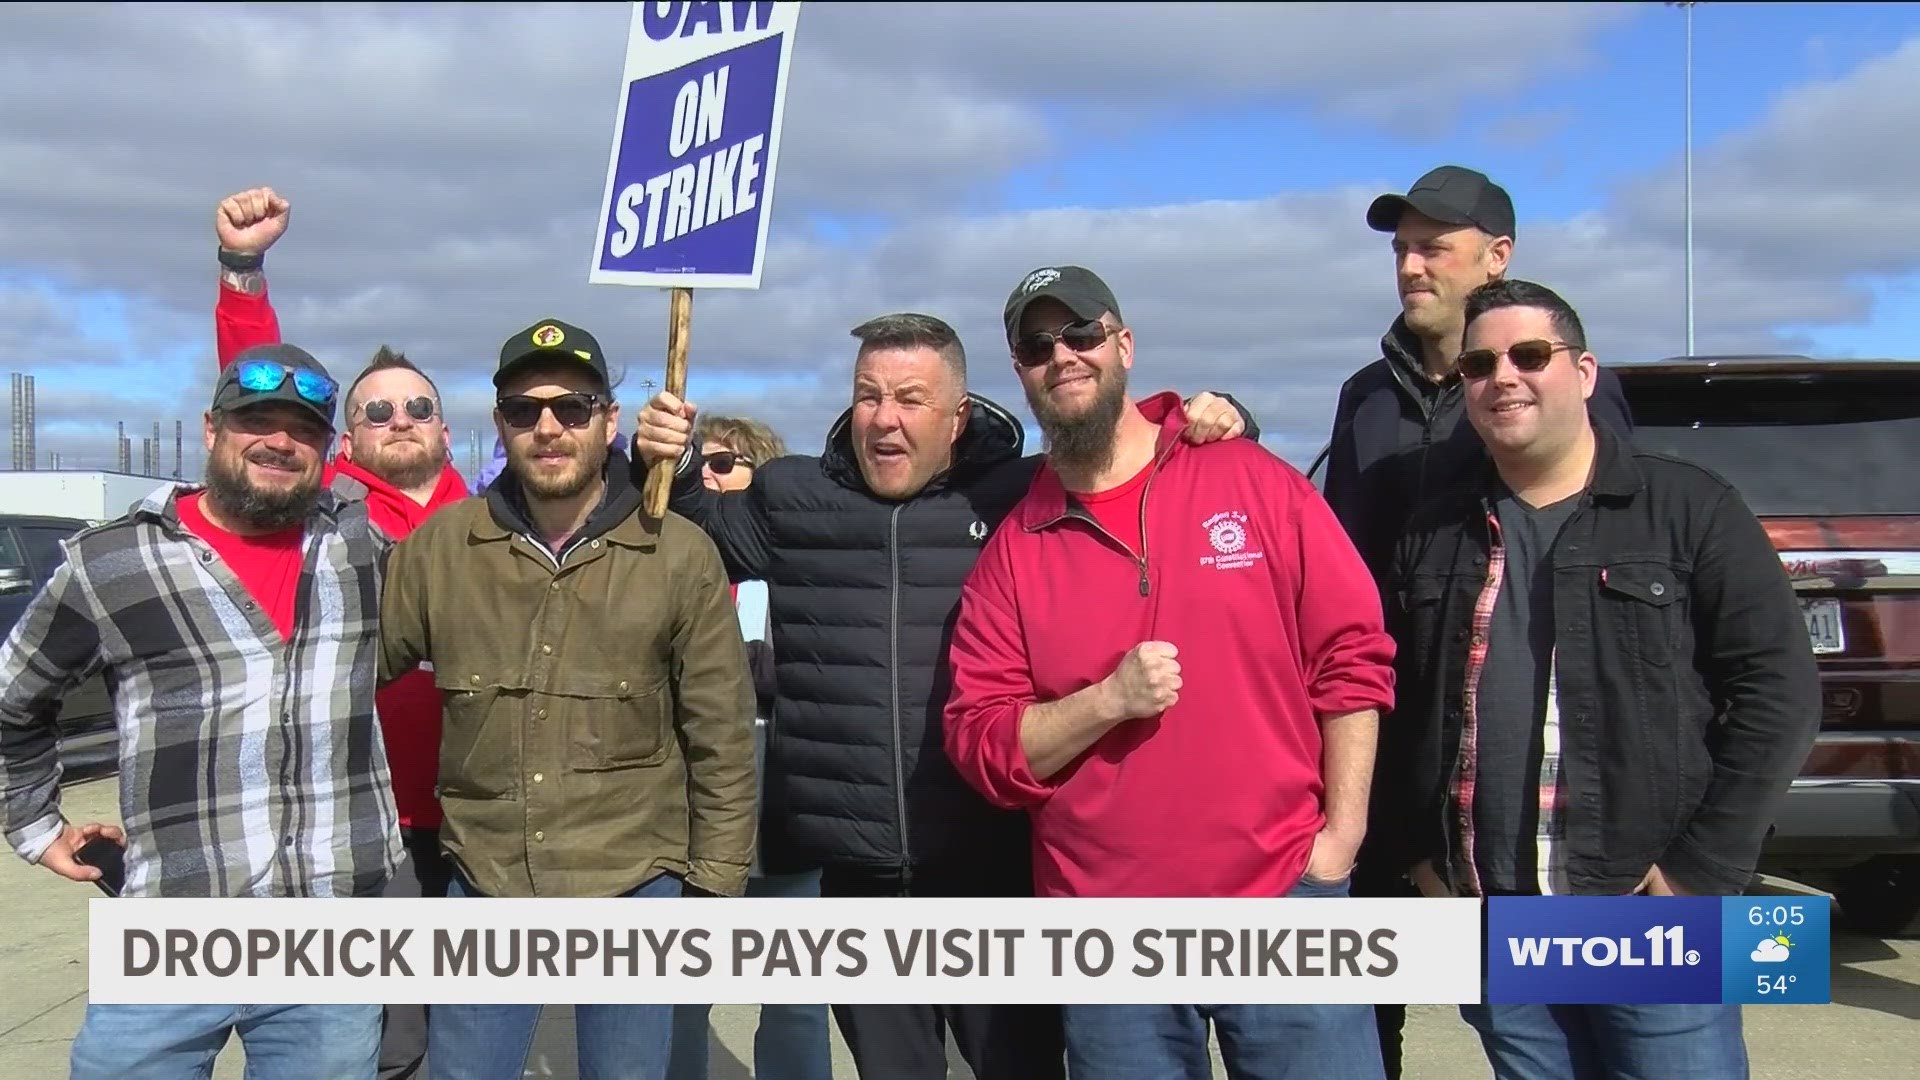 Dropkick Murphys visited Toledo Jeep workers to show support for the UAW strike.